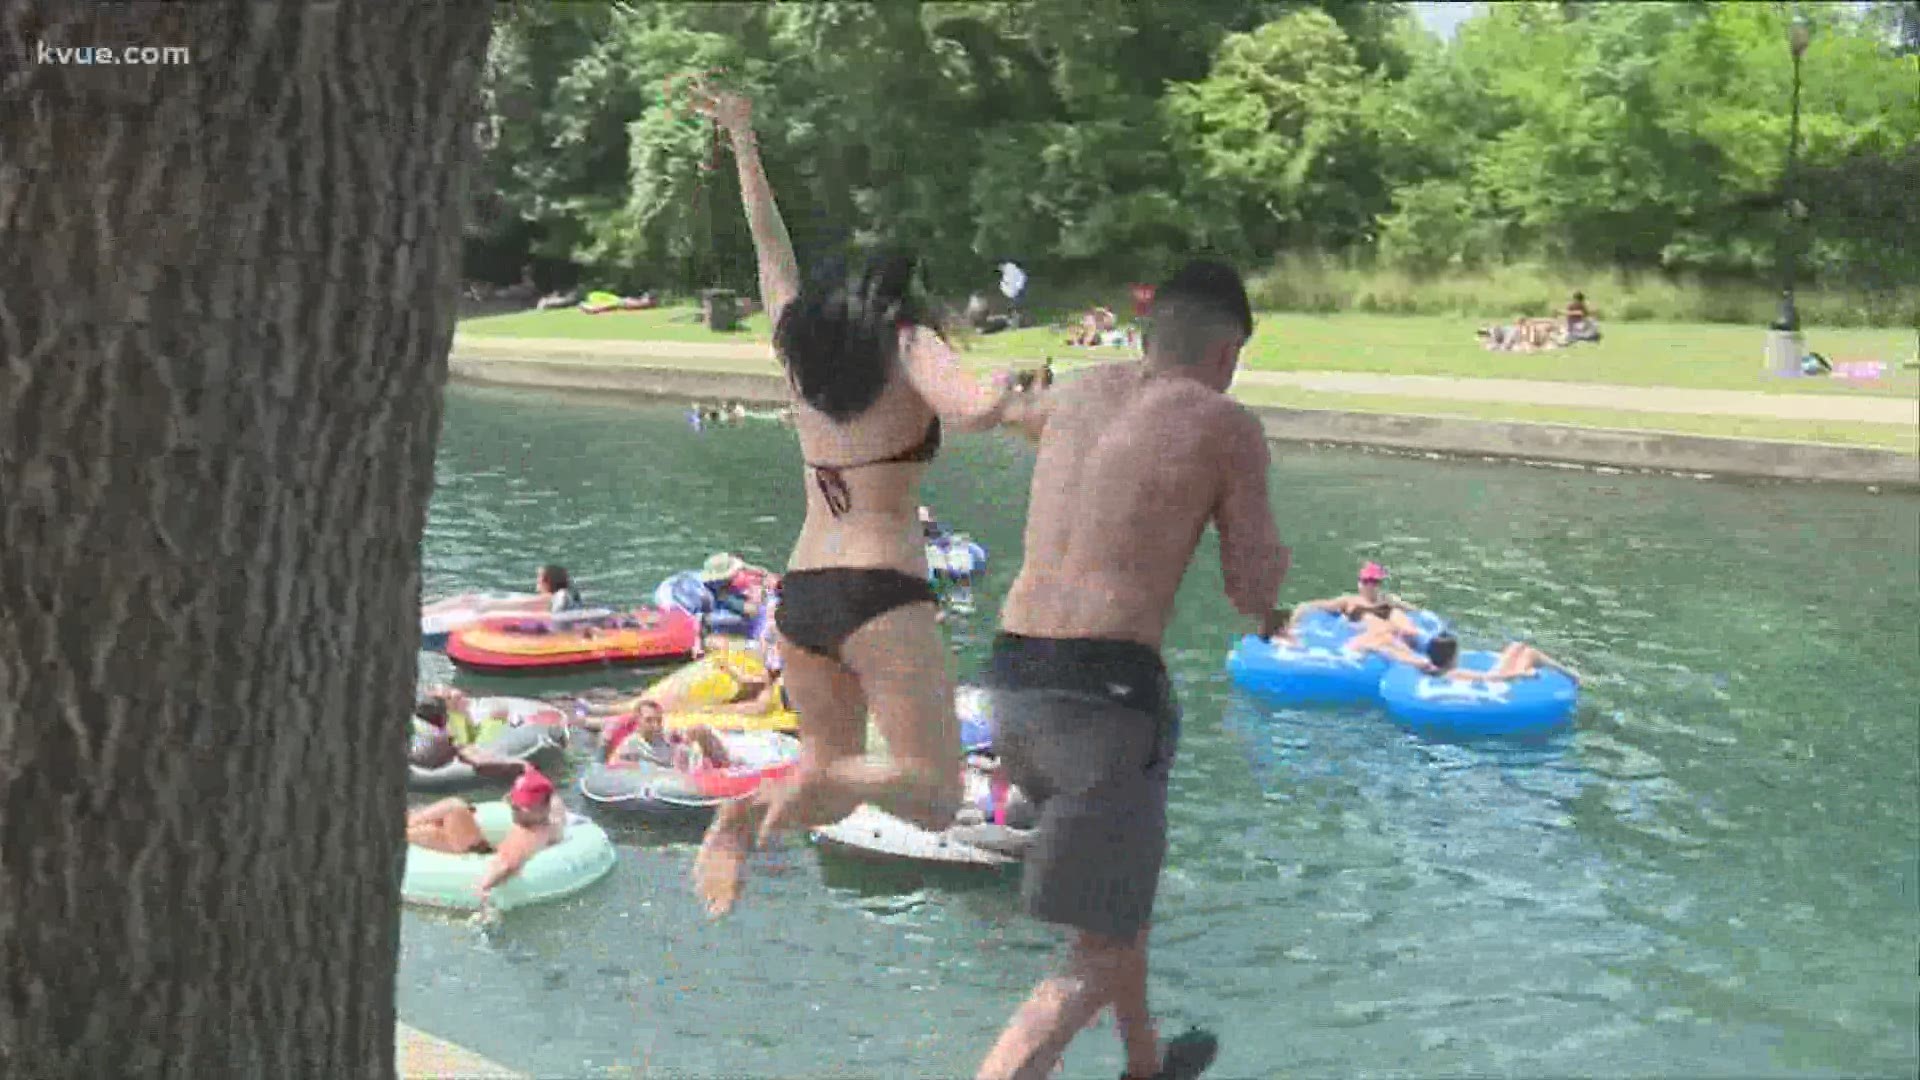 Floating down the Comal River won't be happening for a while.